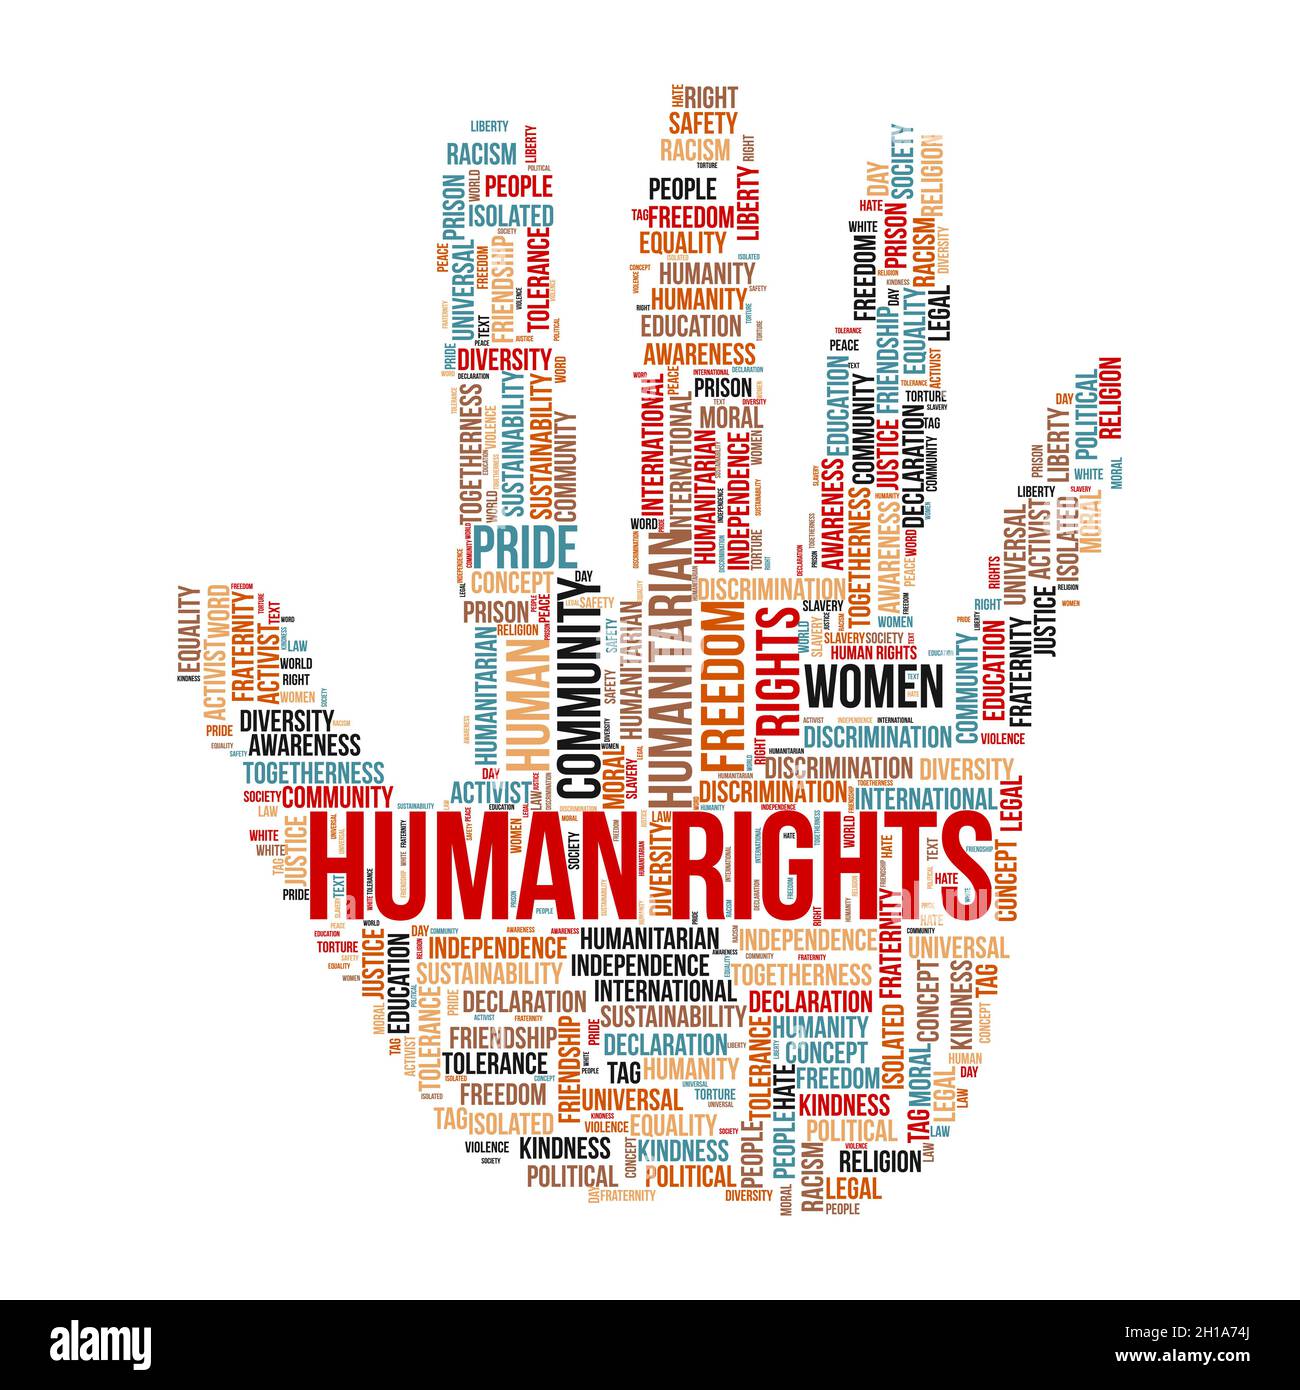 Human rights word cloud concept with hand symbol. Stock Vector